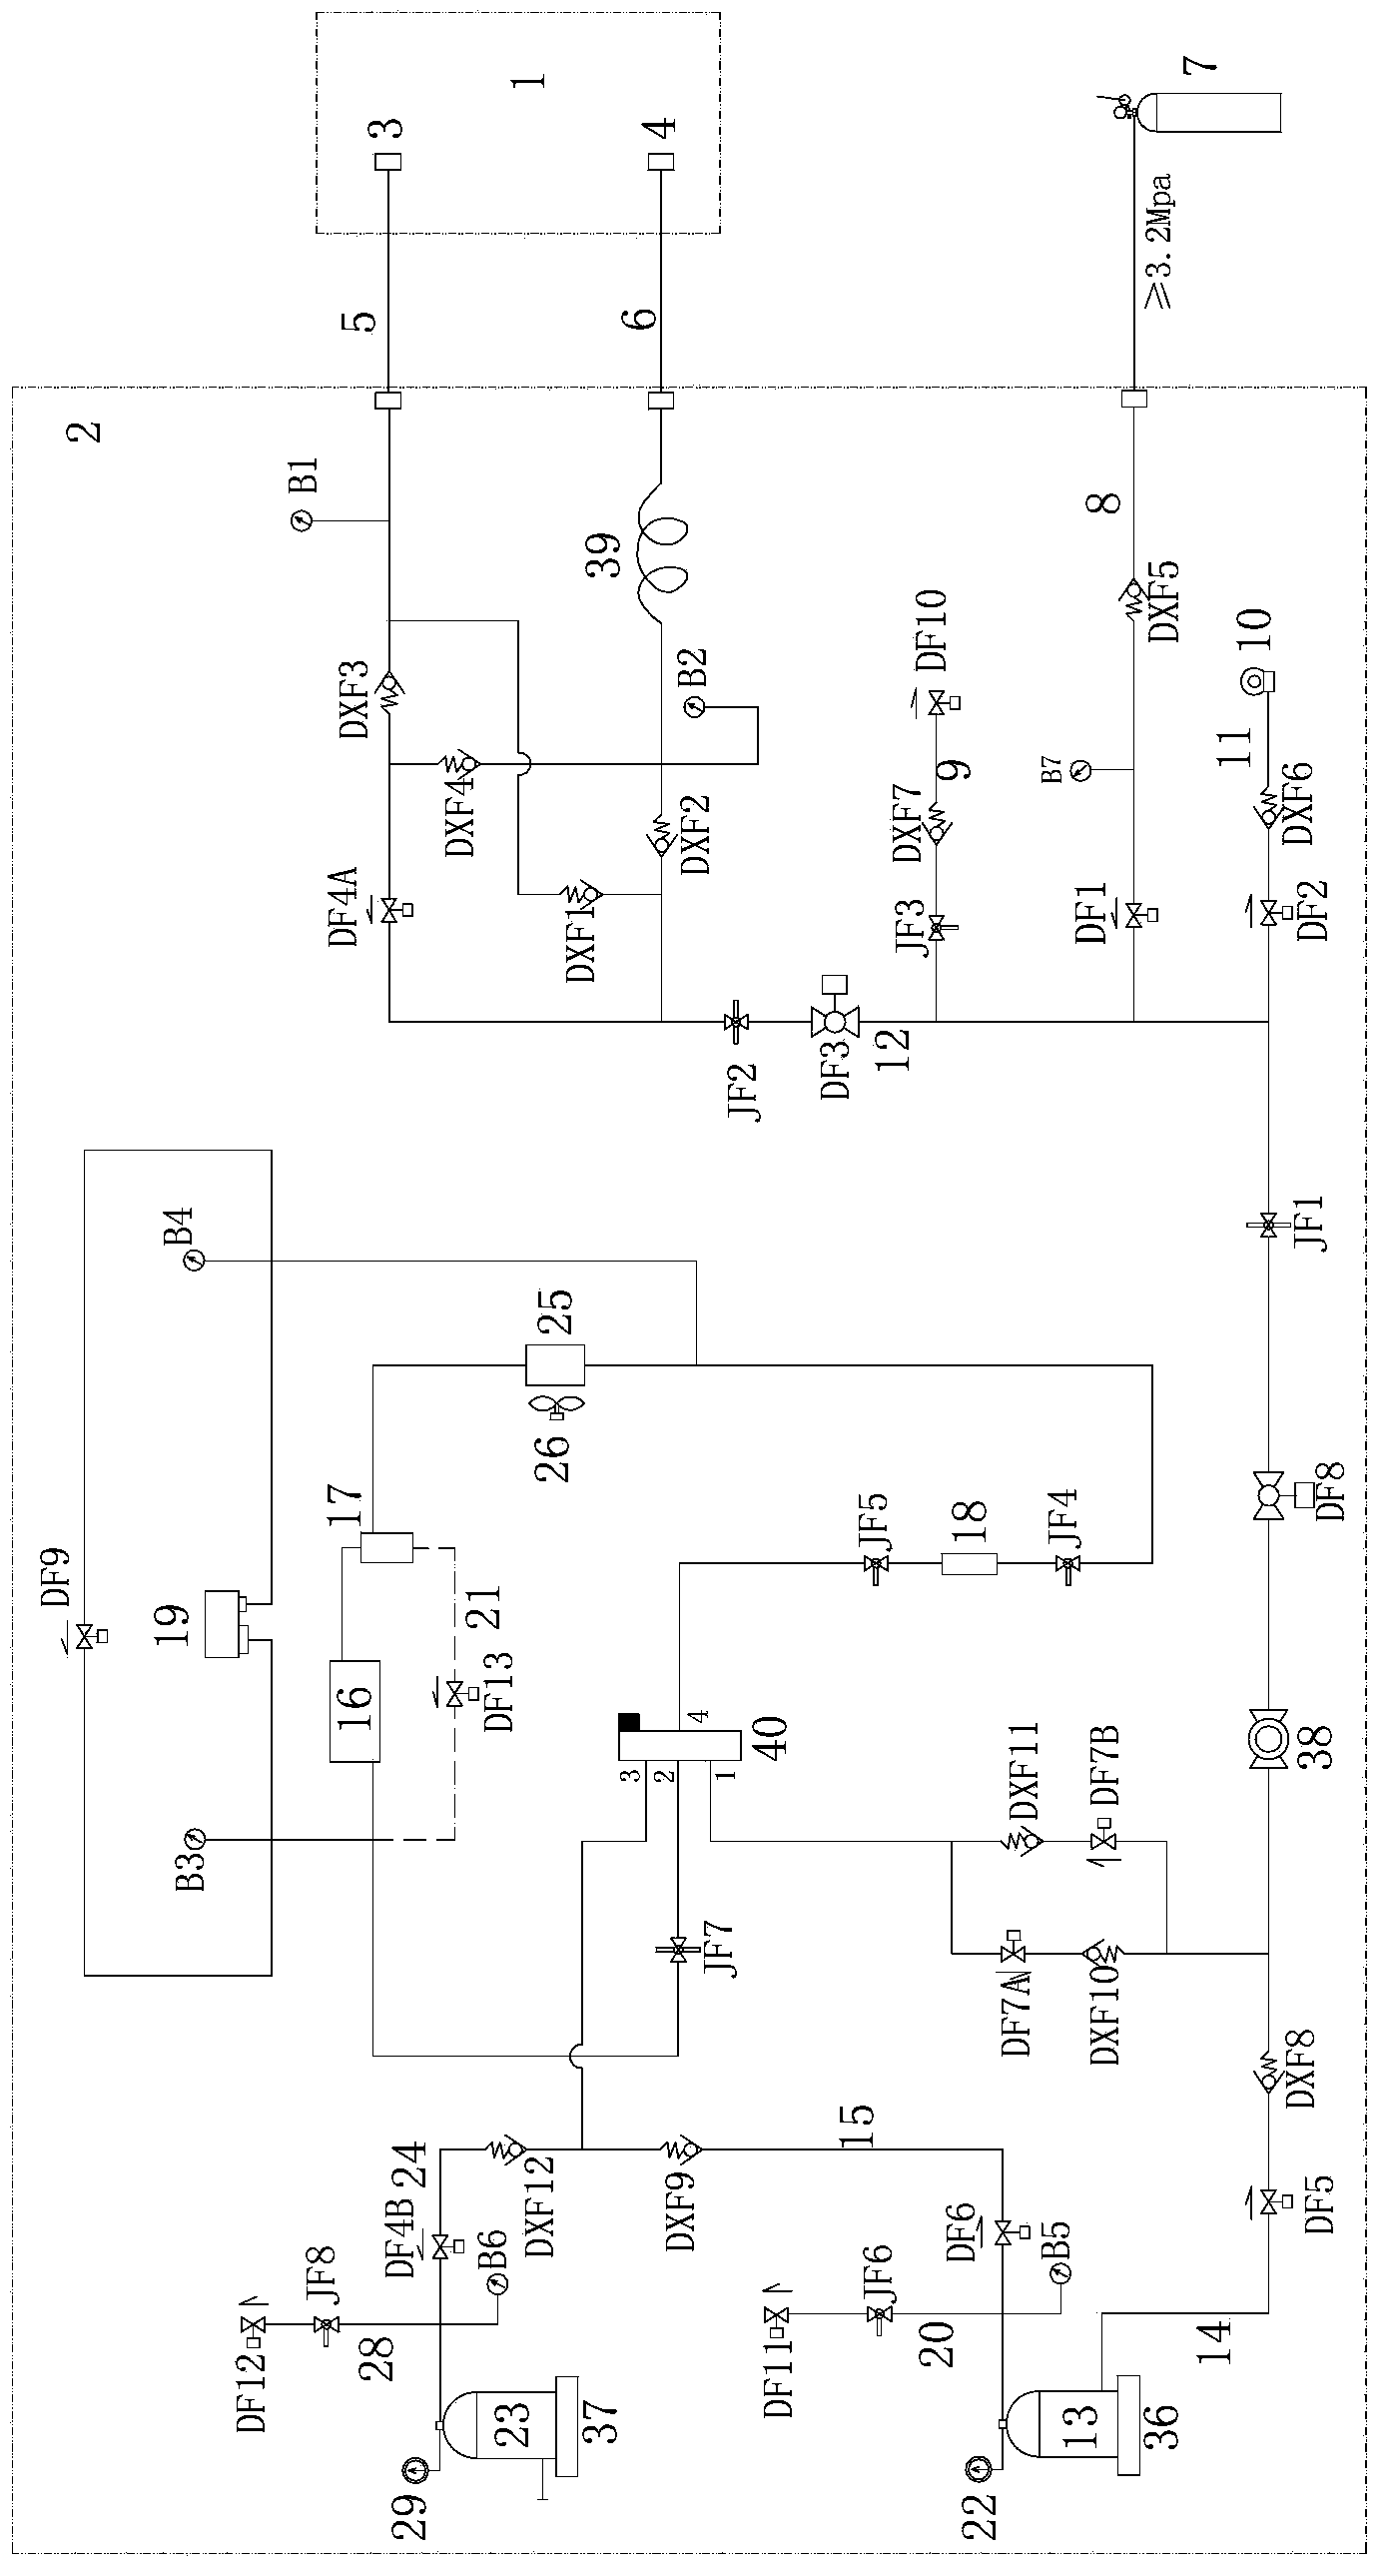 Test system and method for detection of air conditioning system